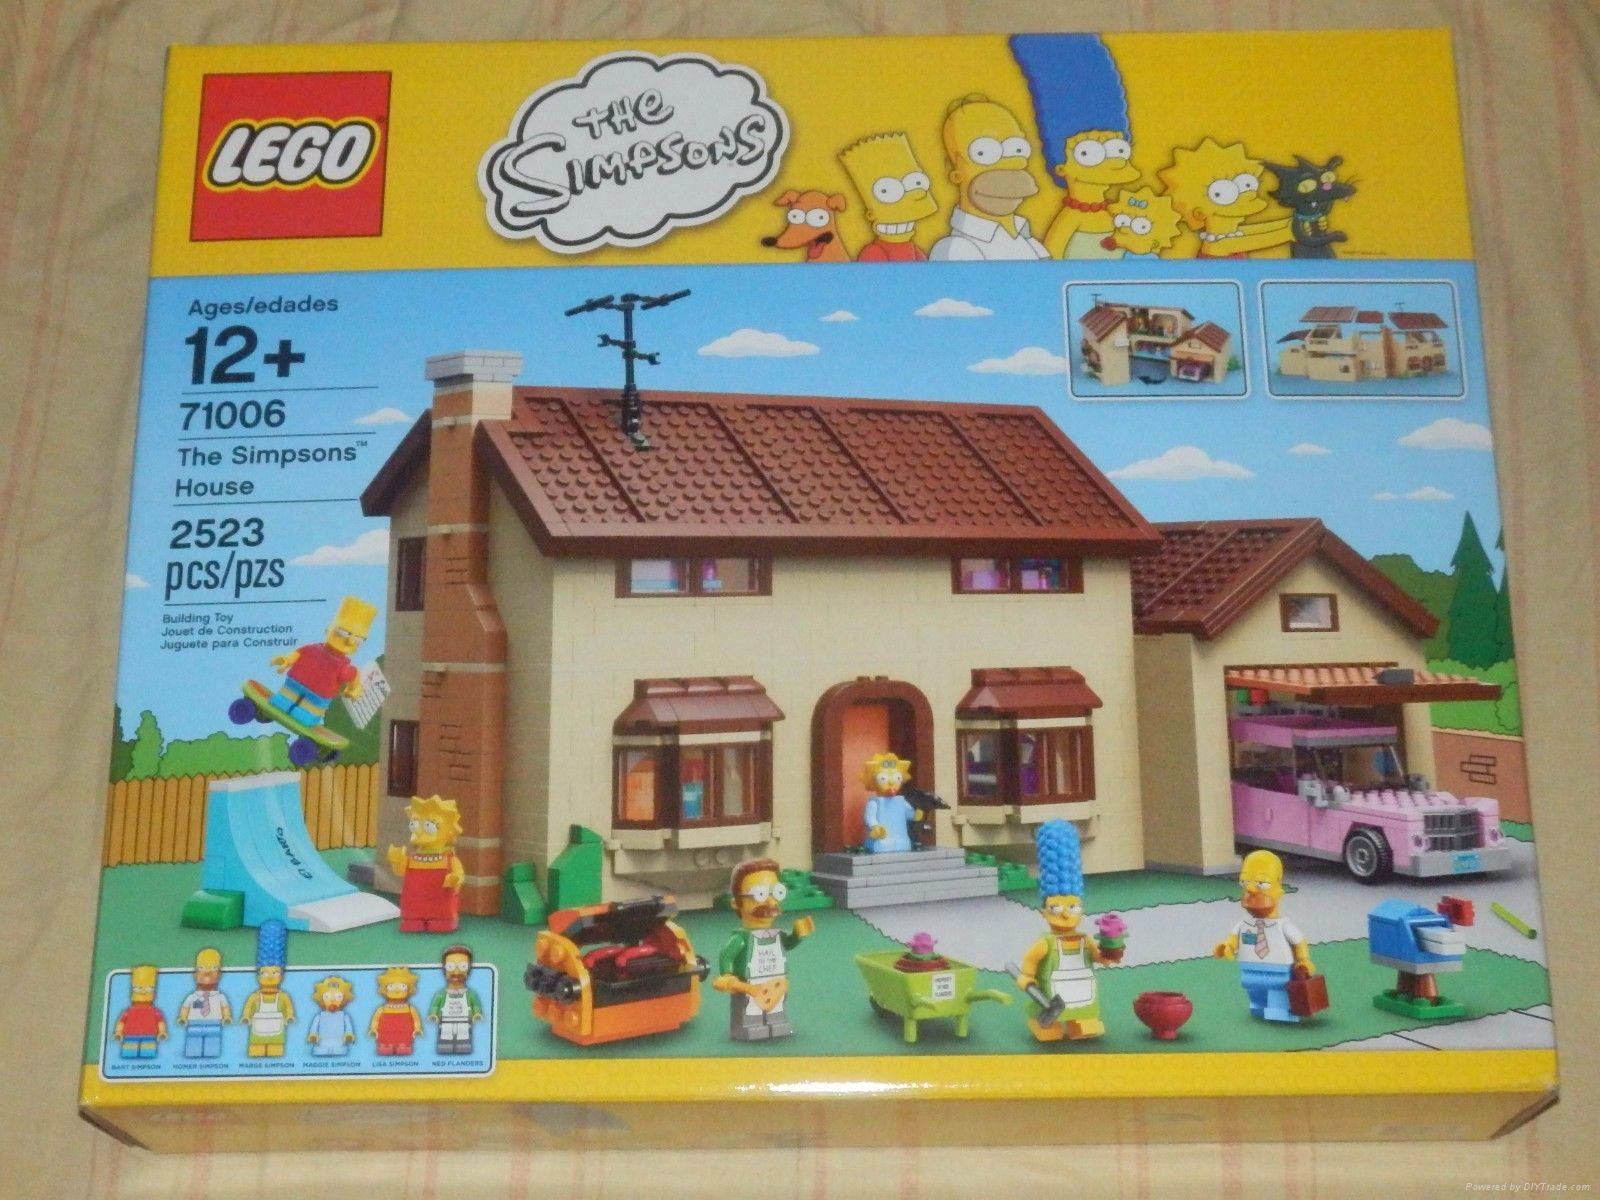 Lego 71006 The Simpsons House Exclusive Set